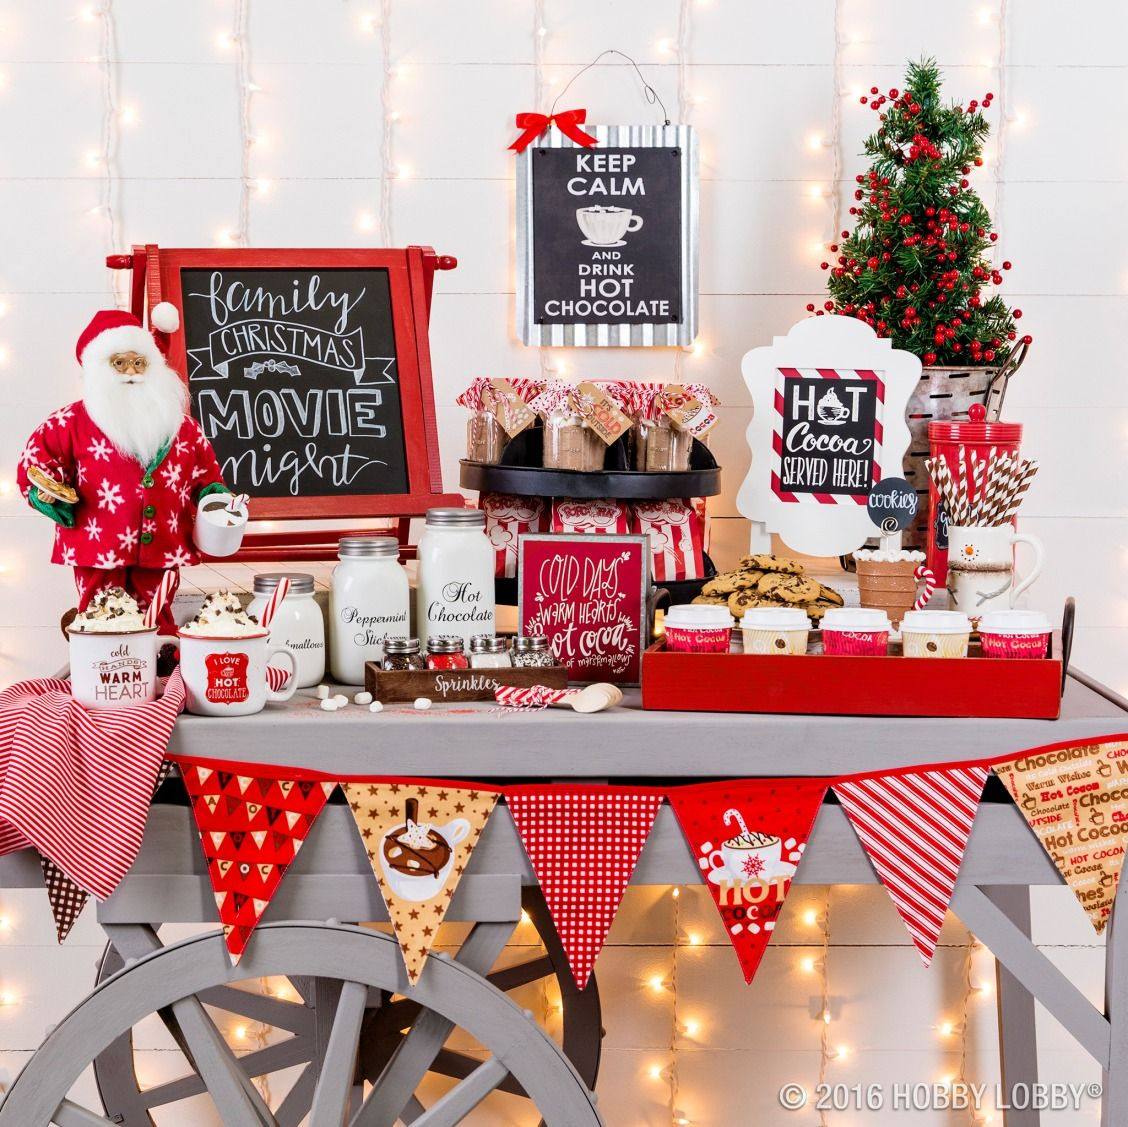 Friend Christmas Party Ideas
 This Christmas host a hot chocolate themed movie night